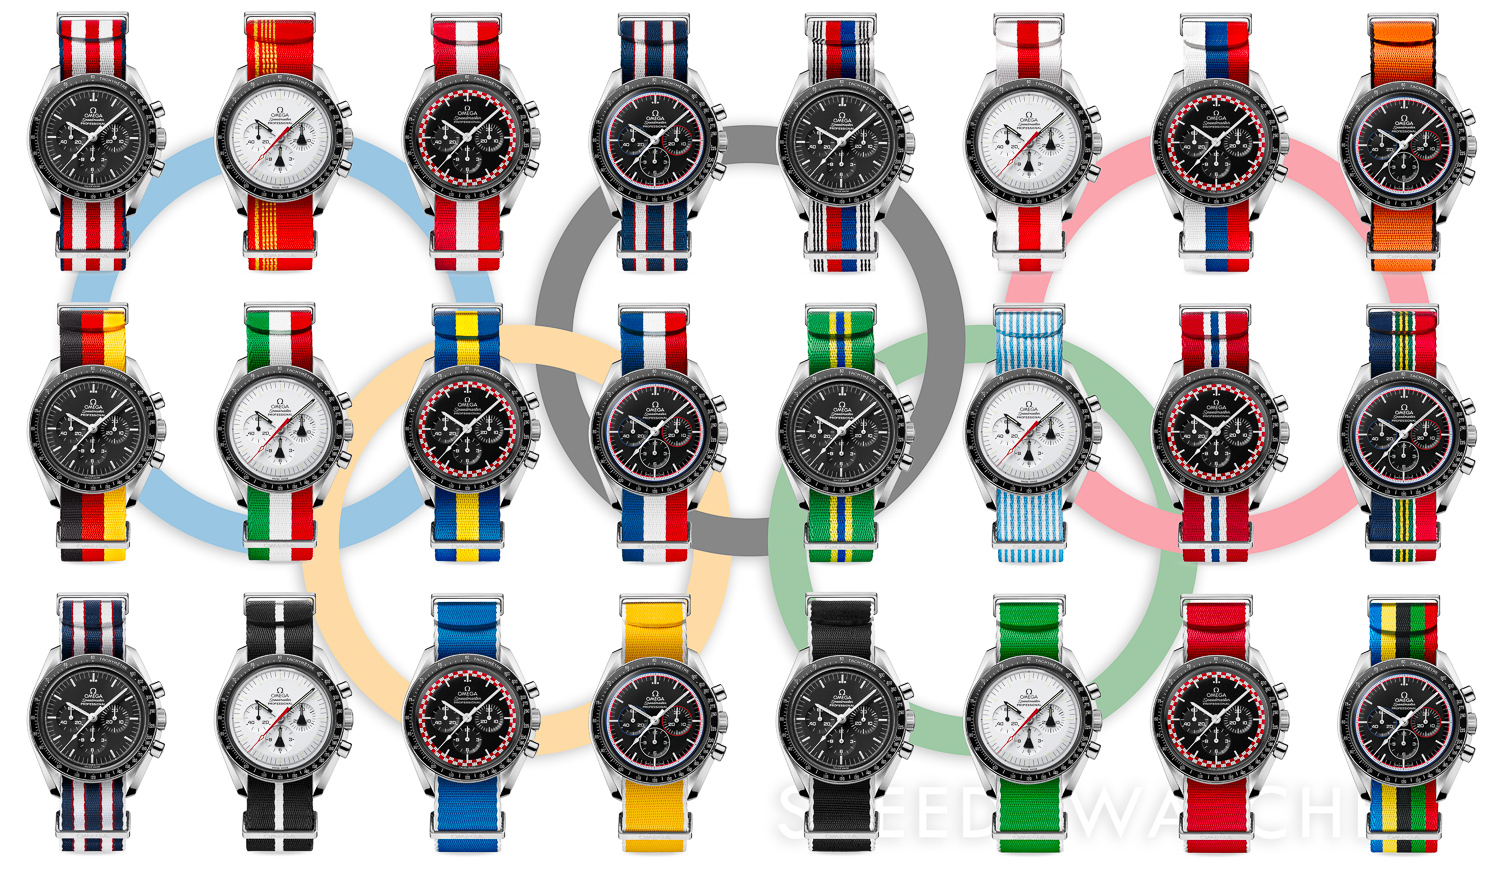 OEM Omega NATO Straps – the 2018 Update Part 2: the Olympic 